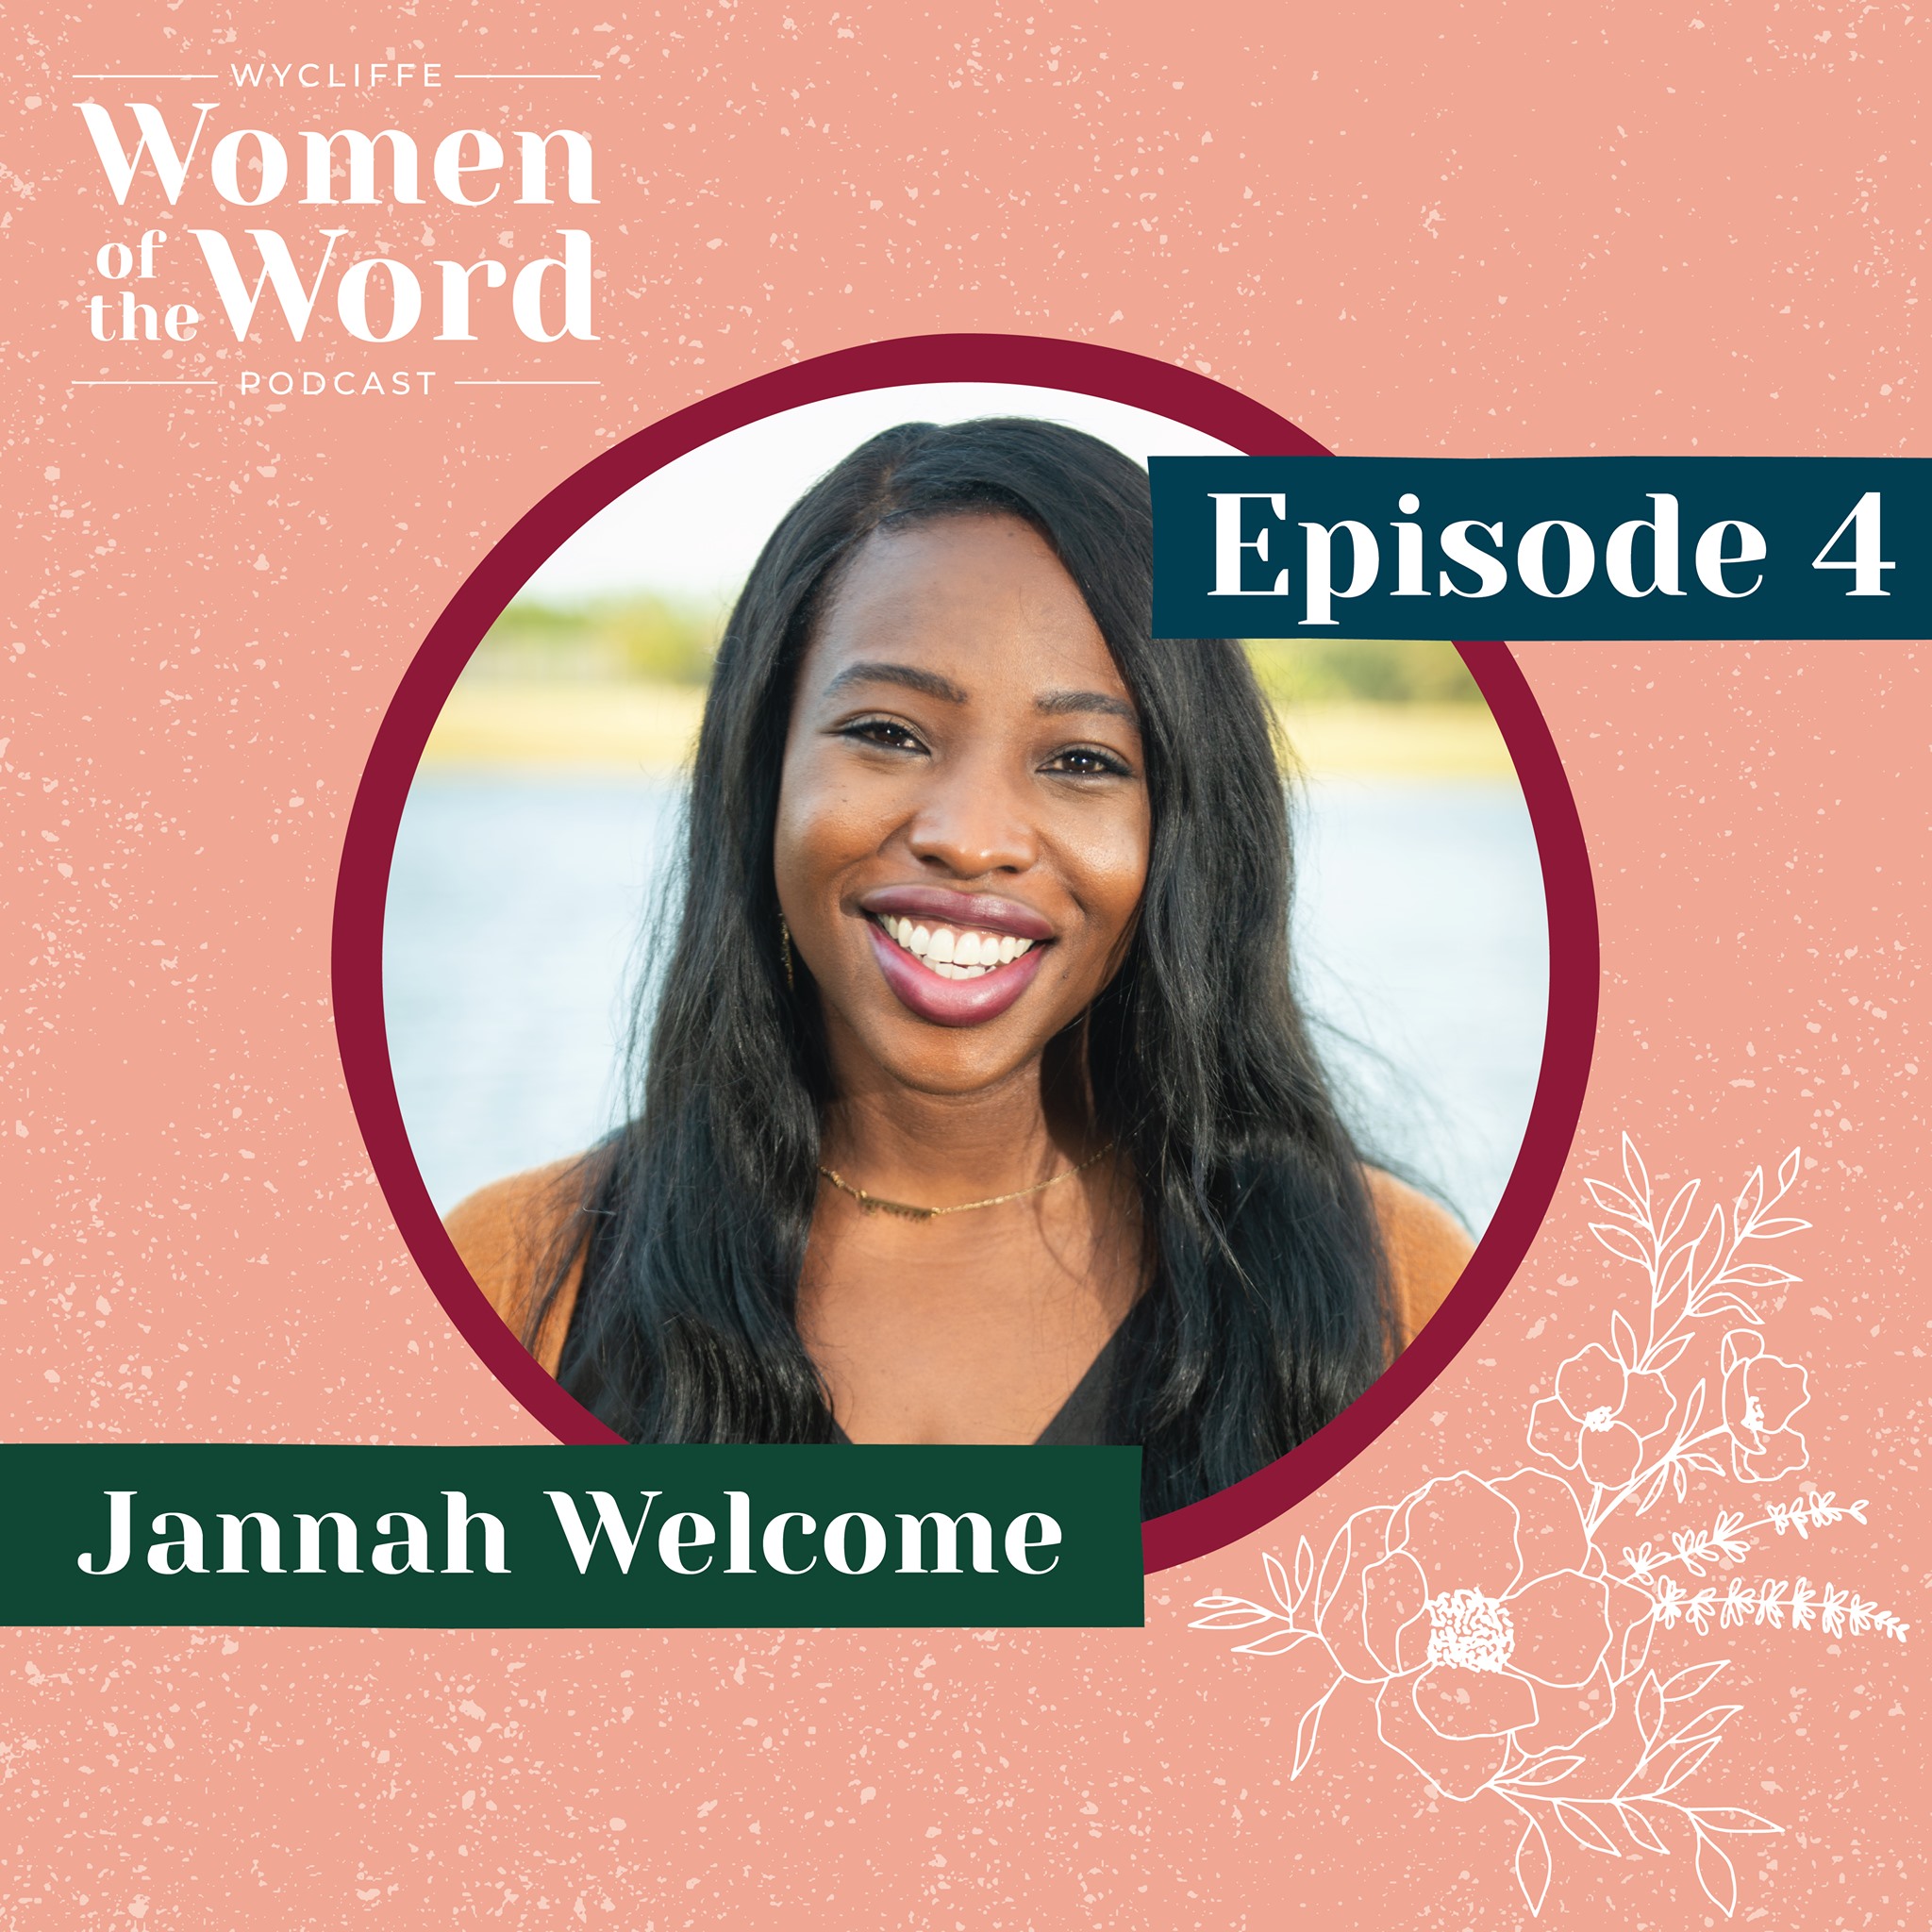 Wycliffe USA’s Women of the Word Podcast Creates Enriching dialogue